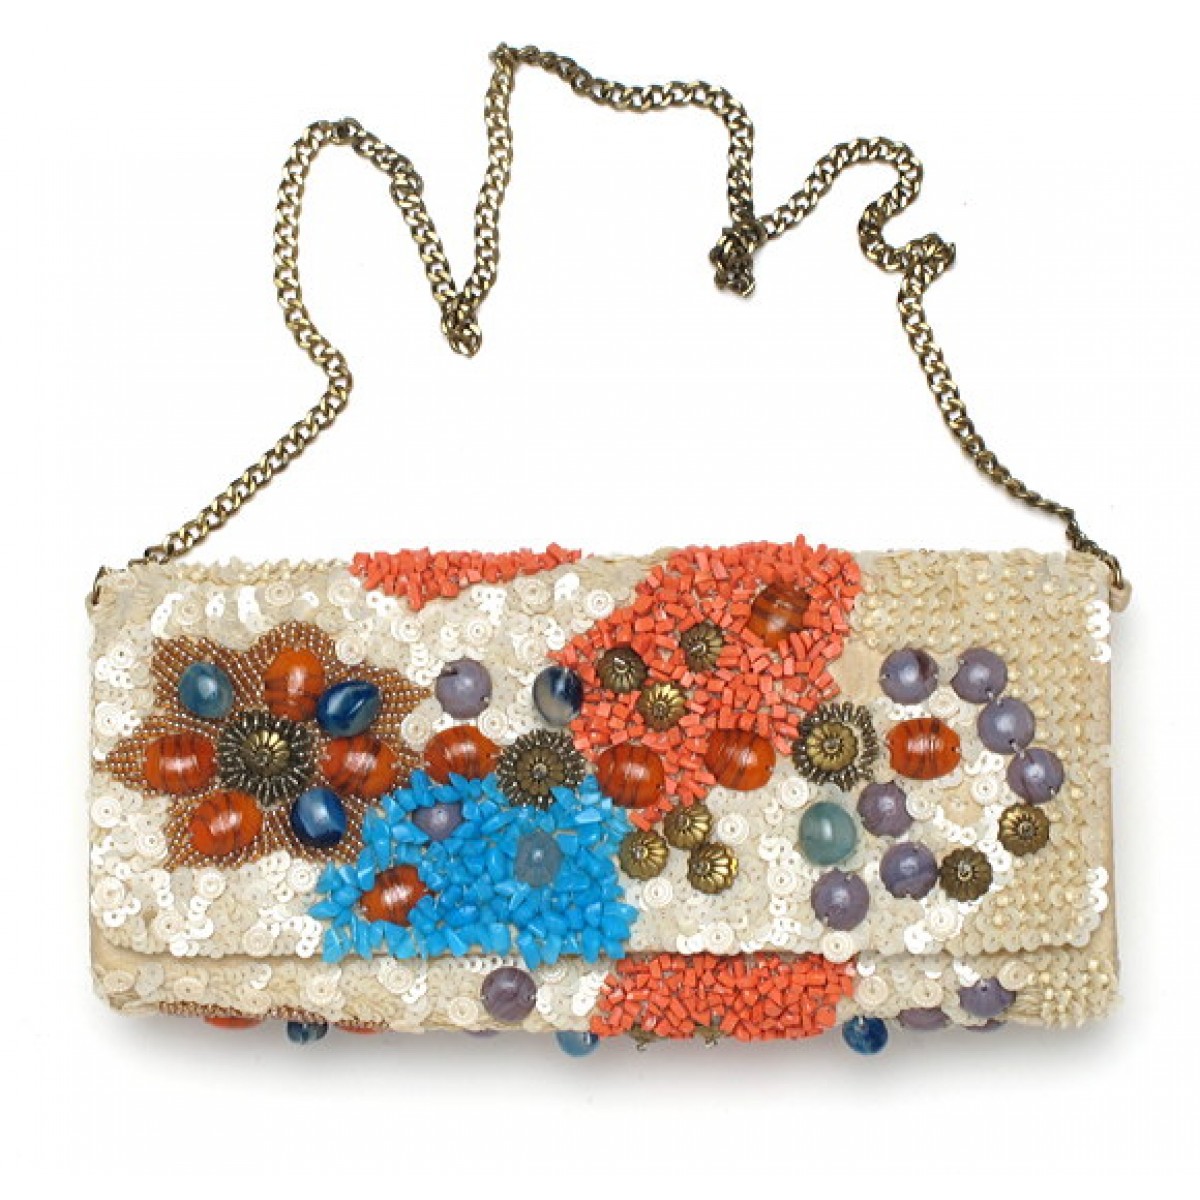 Coral & Turquoise Stone Clutch